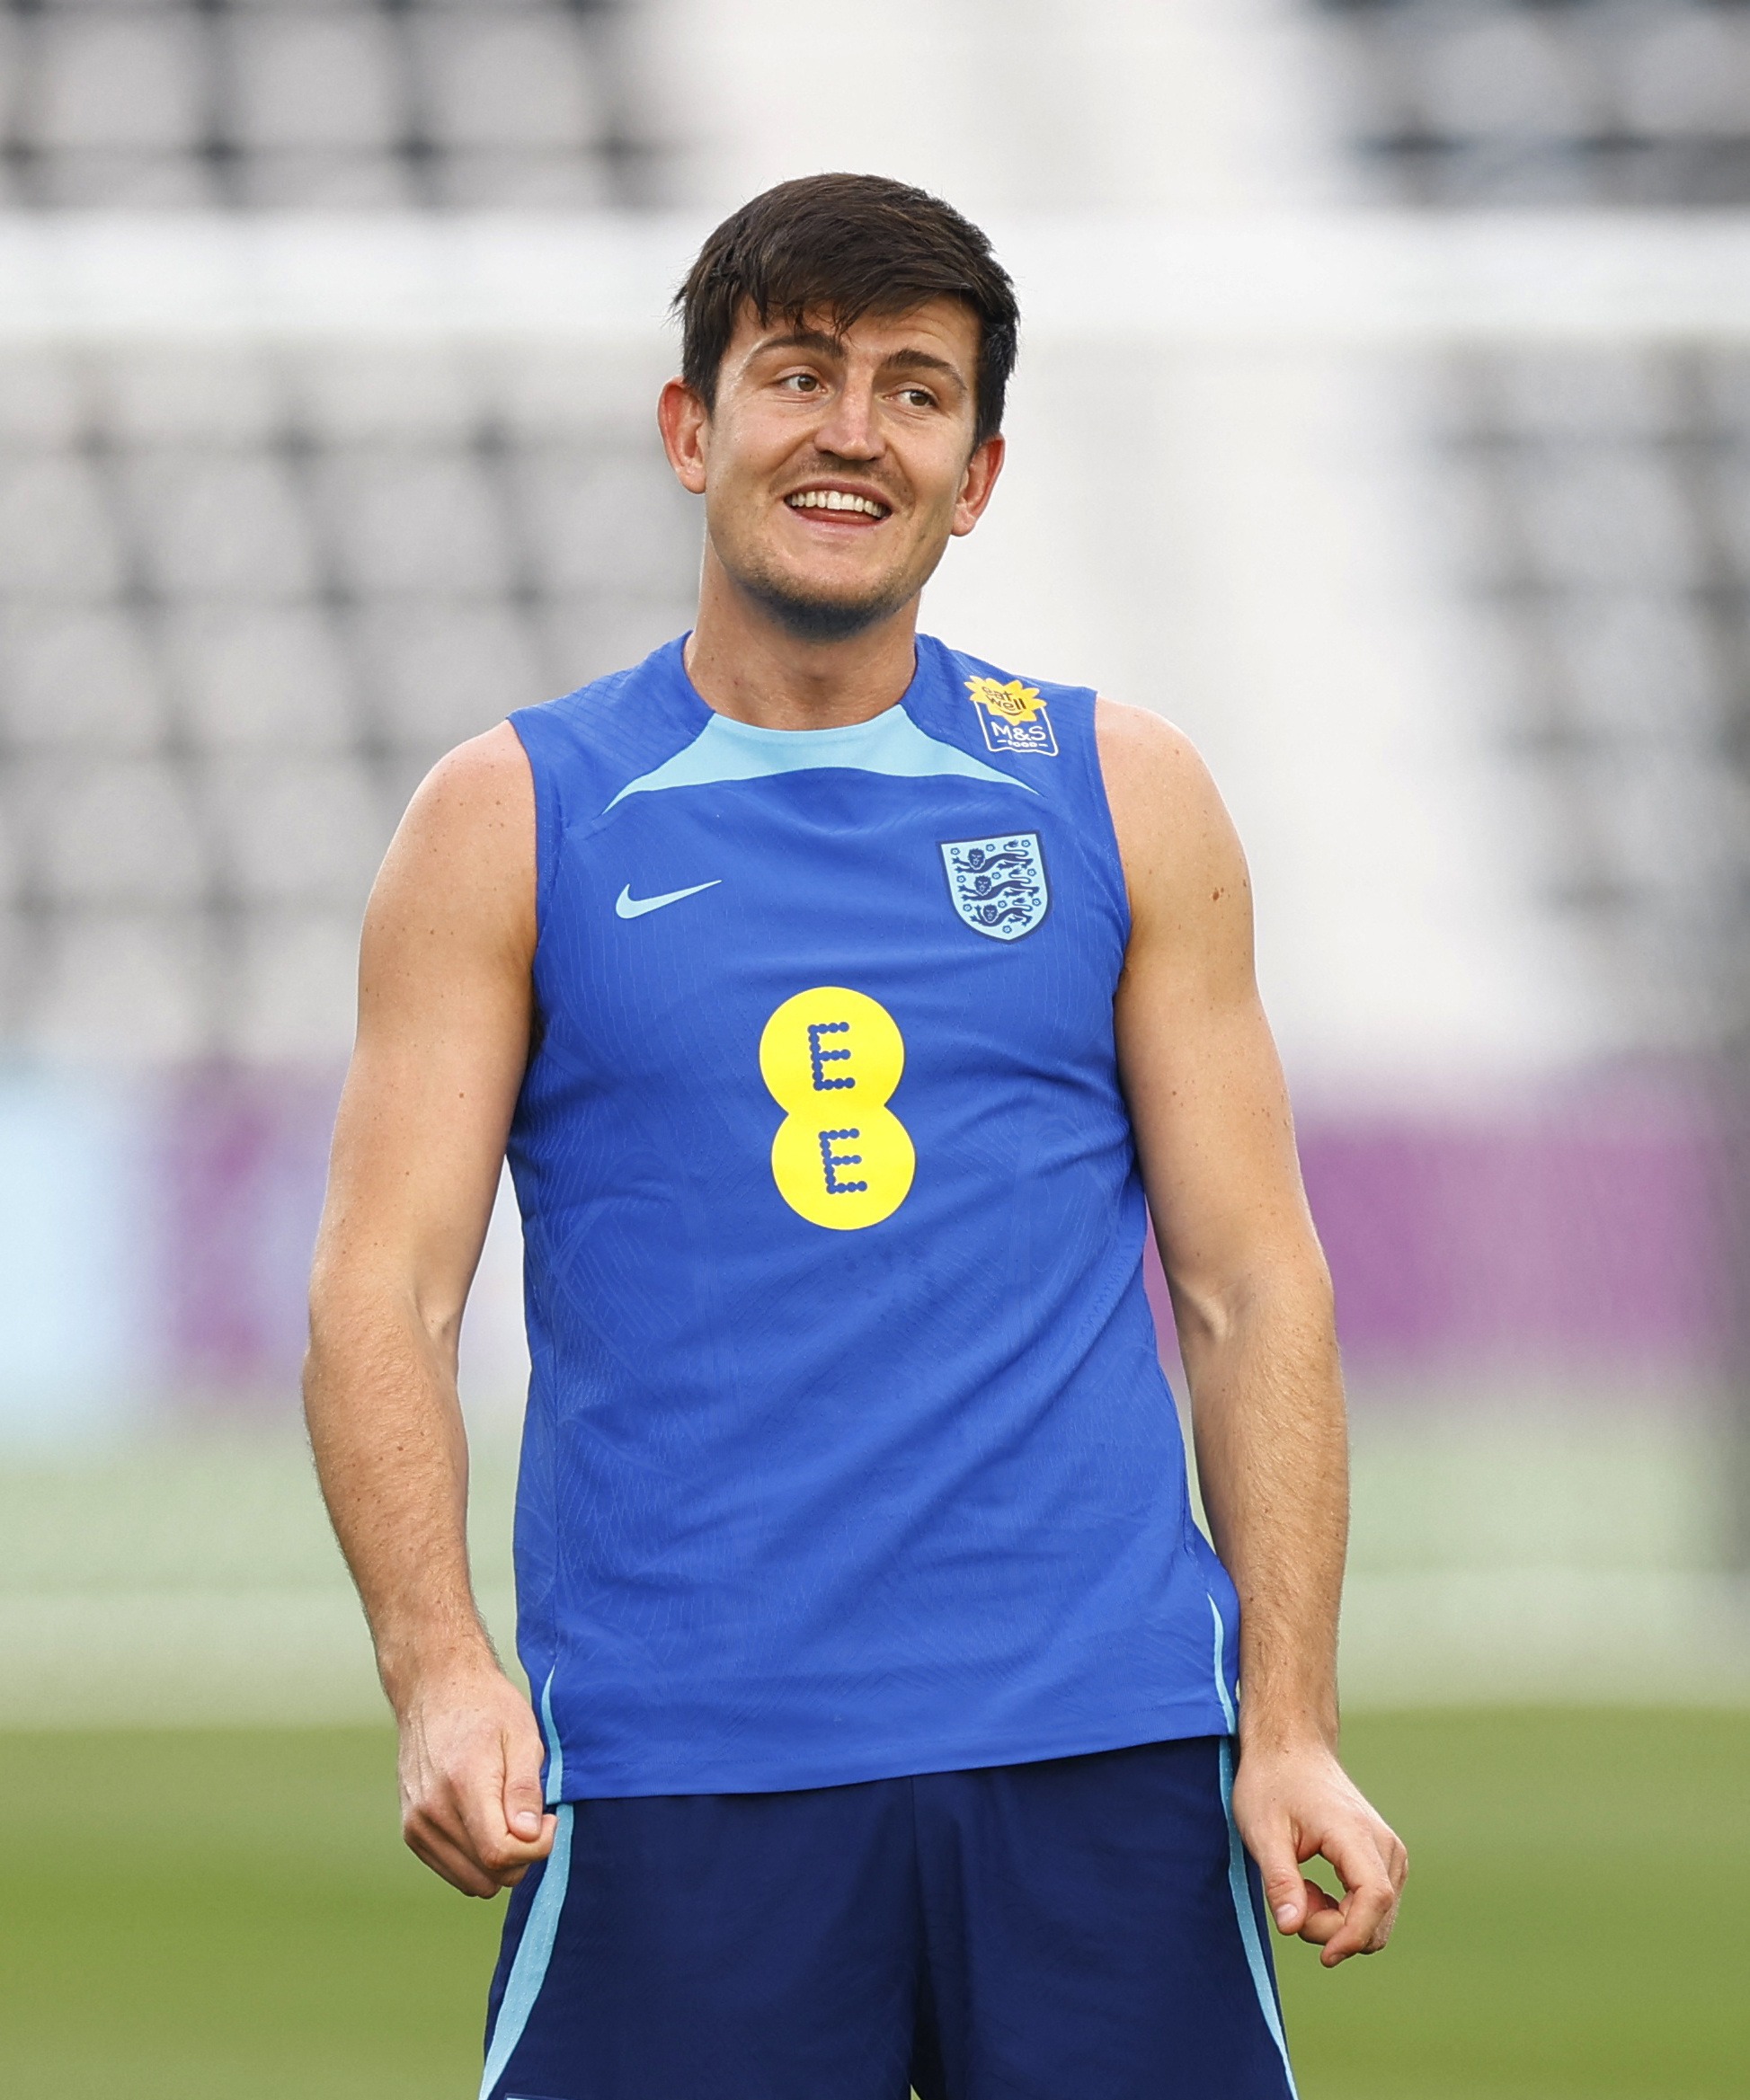 , France’s Giroud isn’t world class but he’s elite – if Maguire thinks he can rock up and dominate him he’s in for a shock